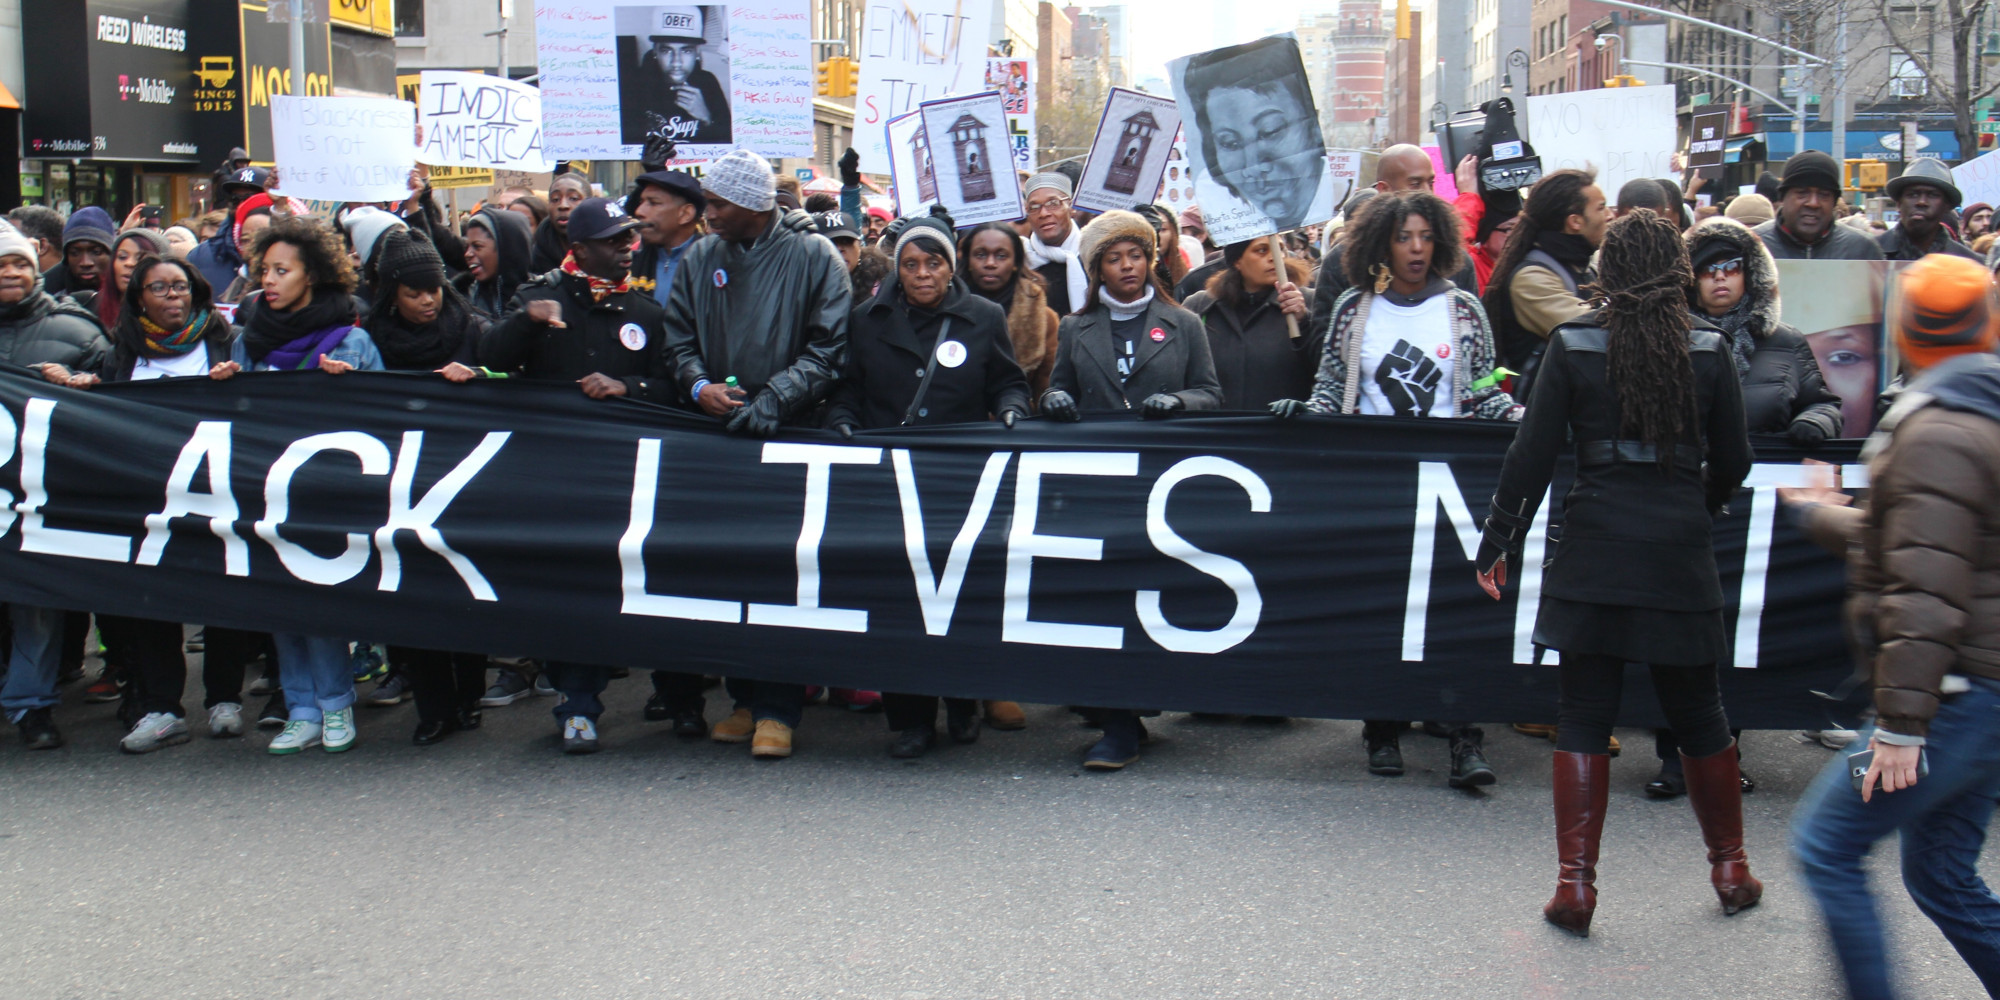 Did you know Black Lives Matter supports abortion, homosexuality, anti-family agenda?